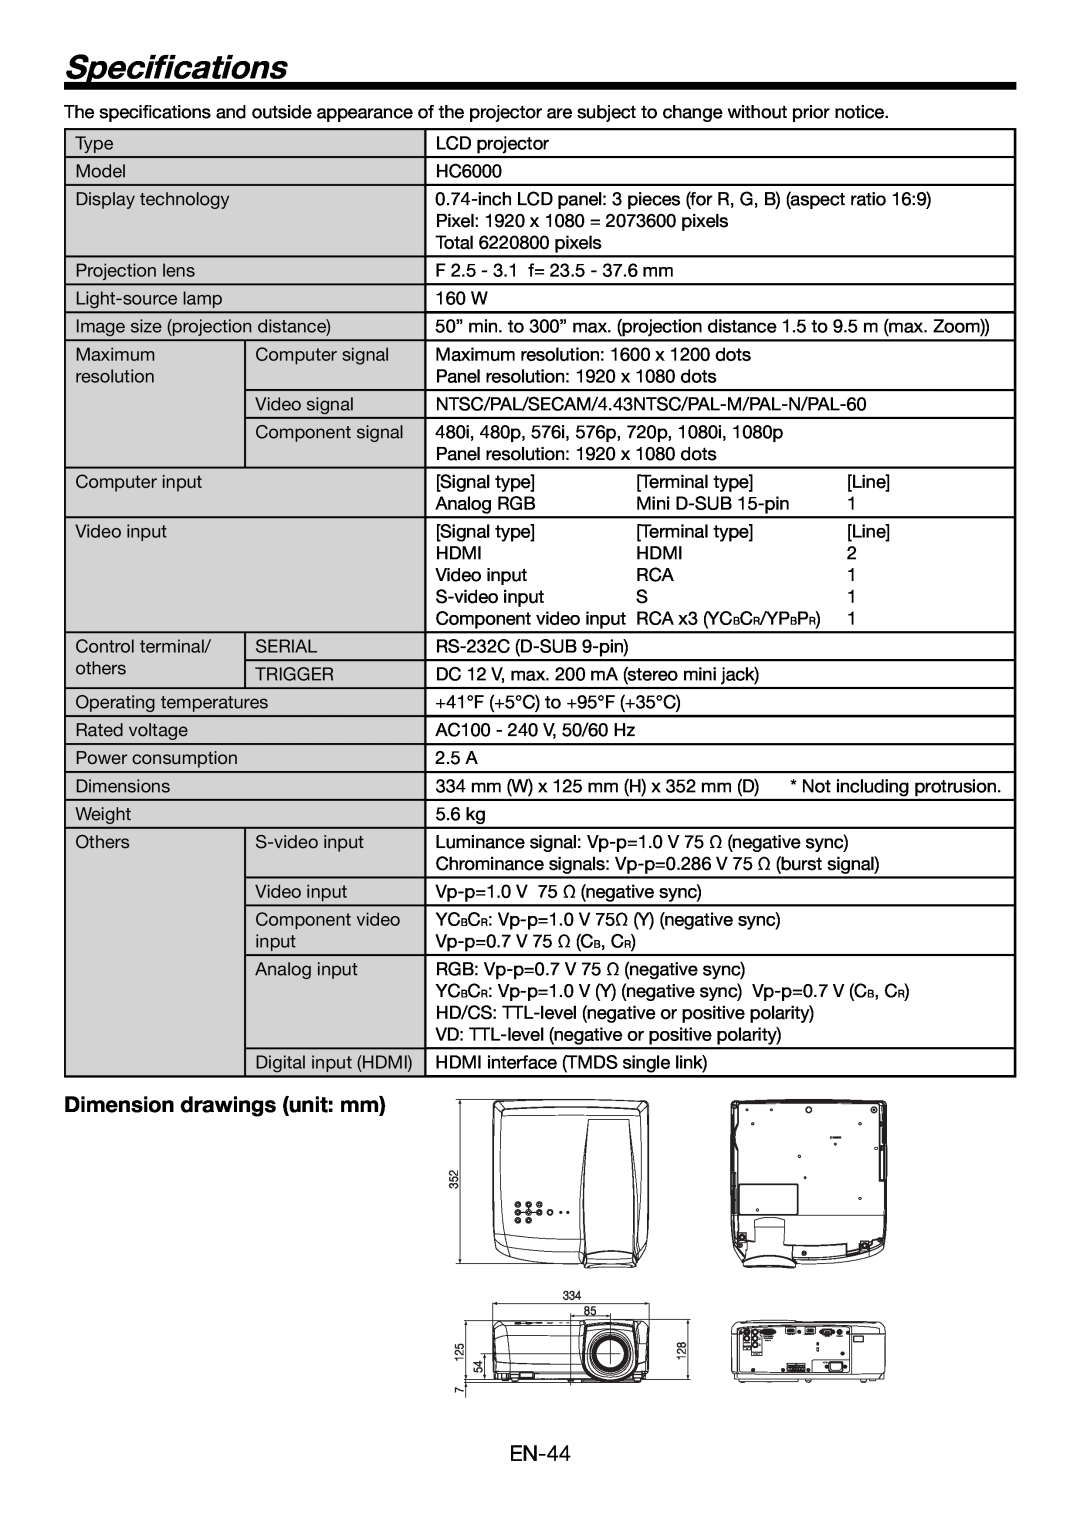 Mitsubishi Electronics HC6000 user manual Speciﬁcations, Dimension drawings unit mm 